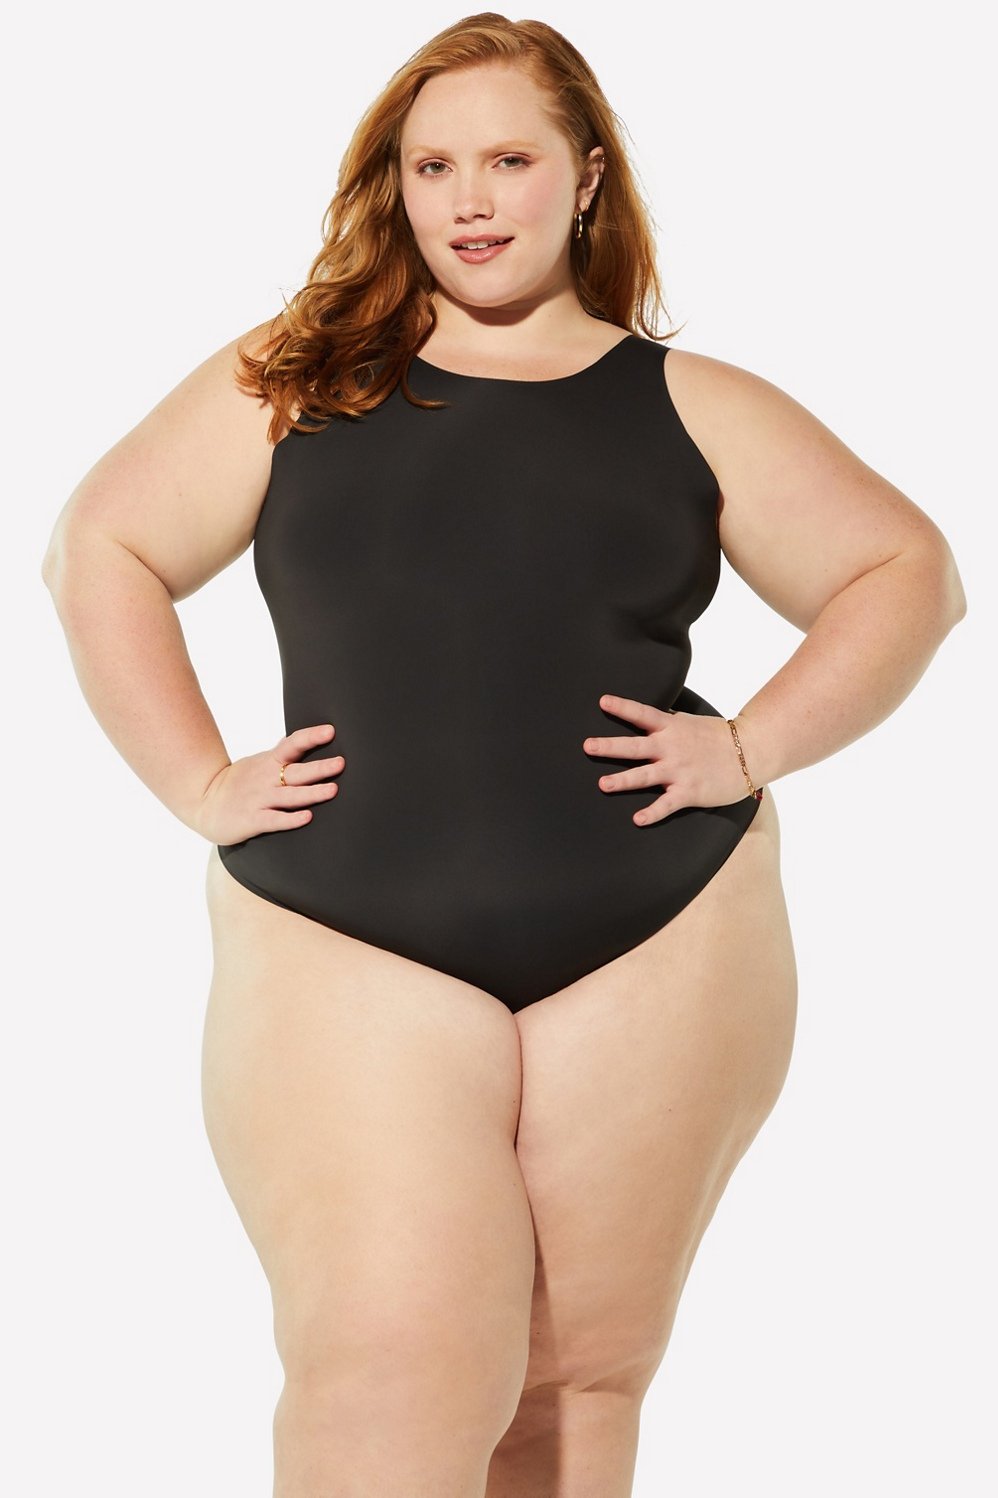 YITTY NWT Spotlight Shaping Demi Cup Thong Bodysuit Shimmer Iconic Black  Size 3X - $48 New With Tags - From Briana